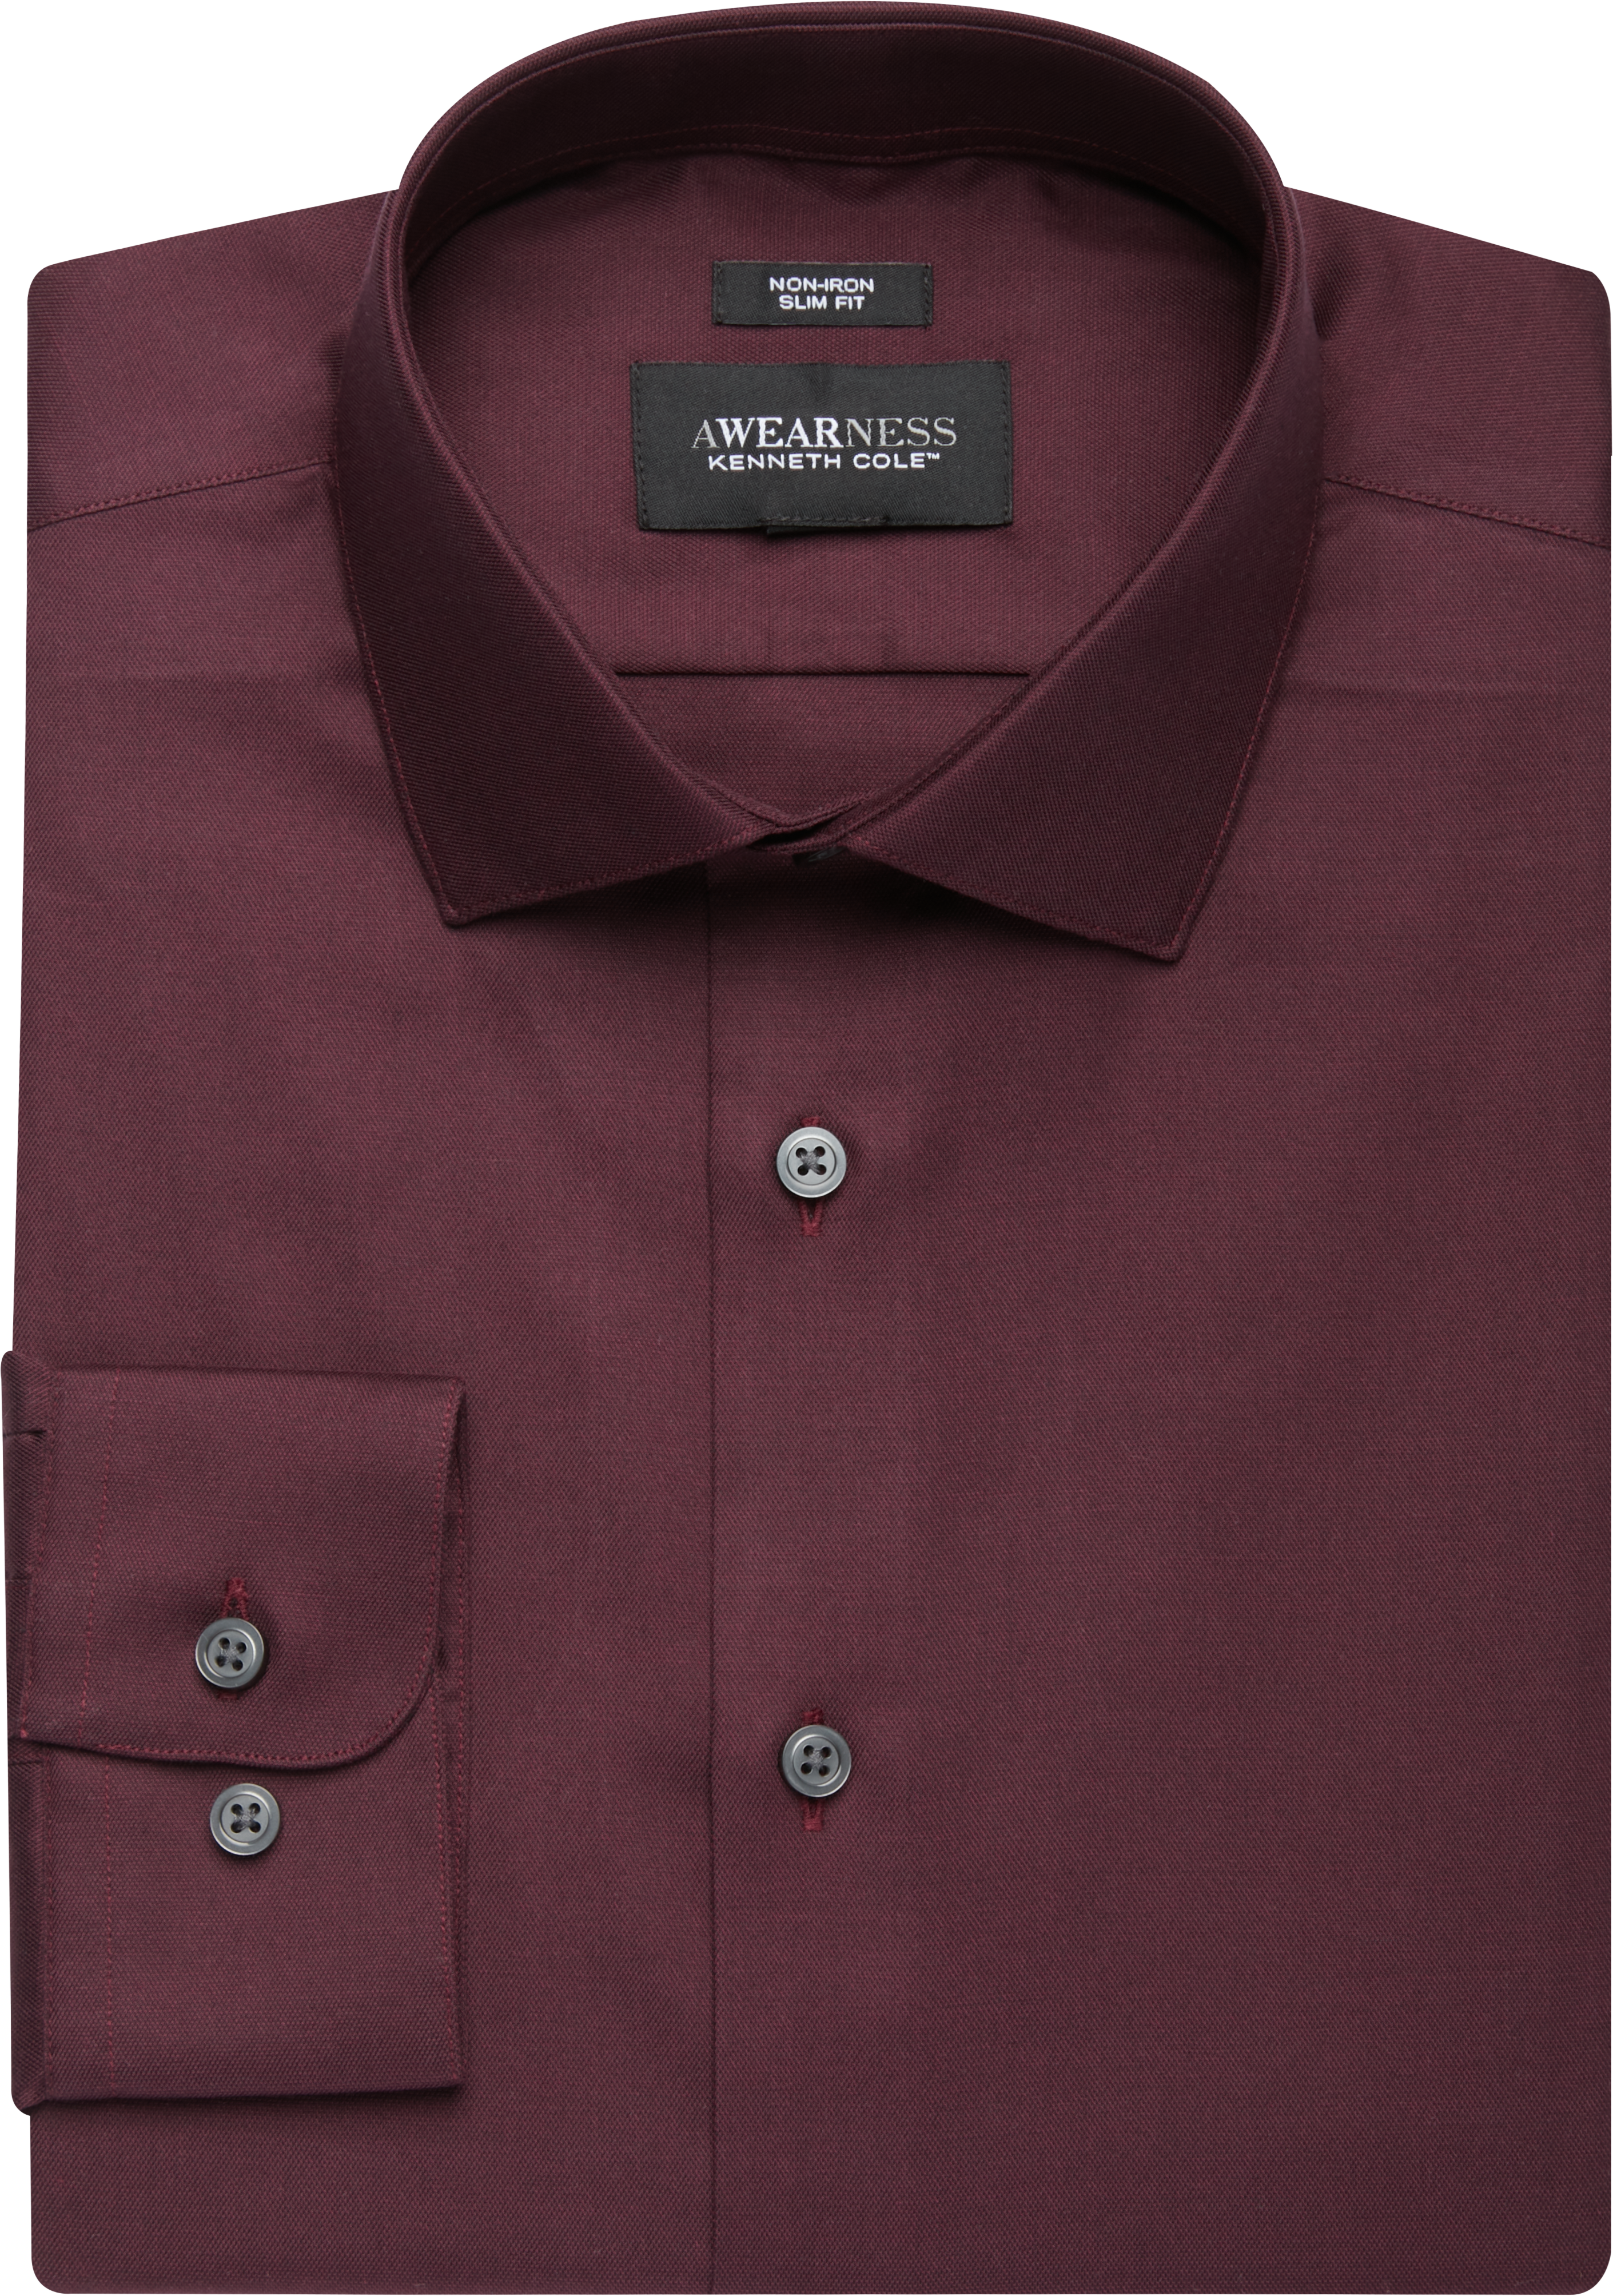 Awearness Kenneth Cole Burgundy Slim Fit Dress Shirt - Men's Suits ...